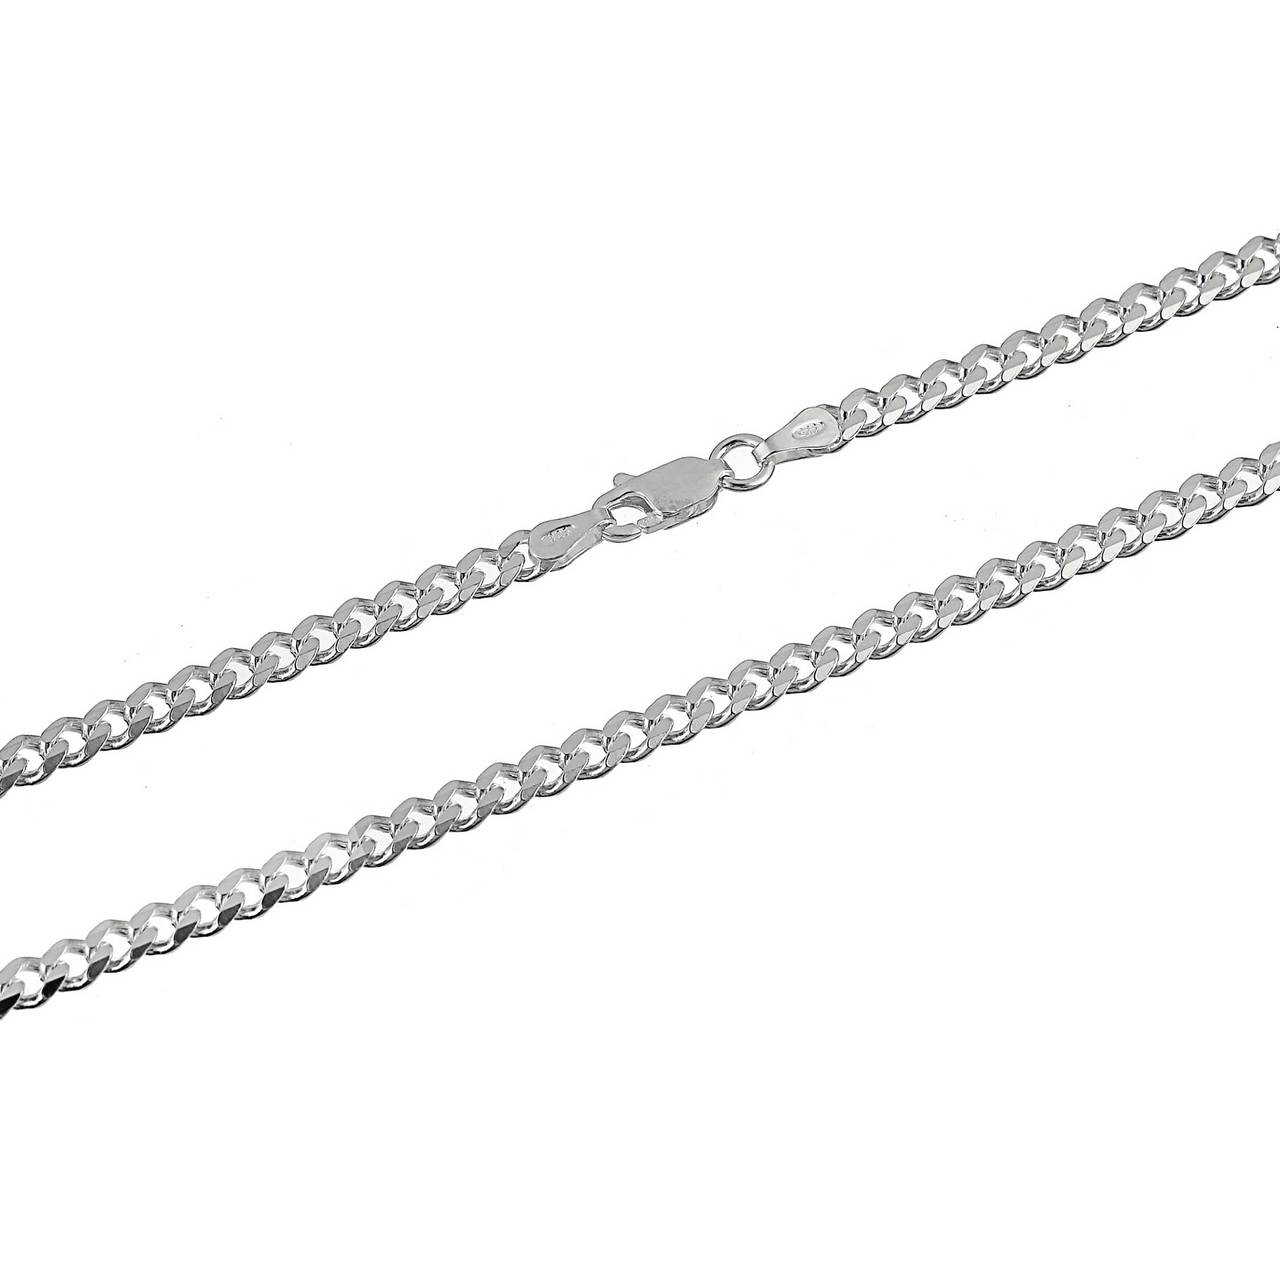 Men's 3.5MM Sterling Silver 925 Italian Curb Chain Necklace 16 18